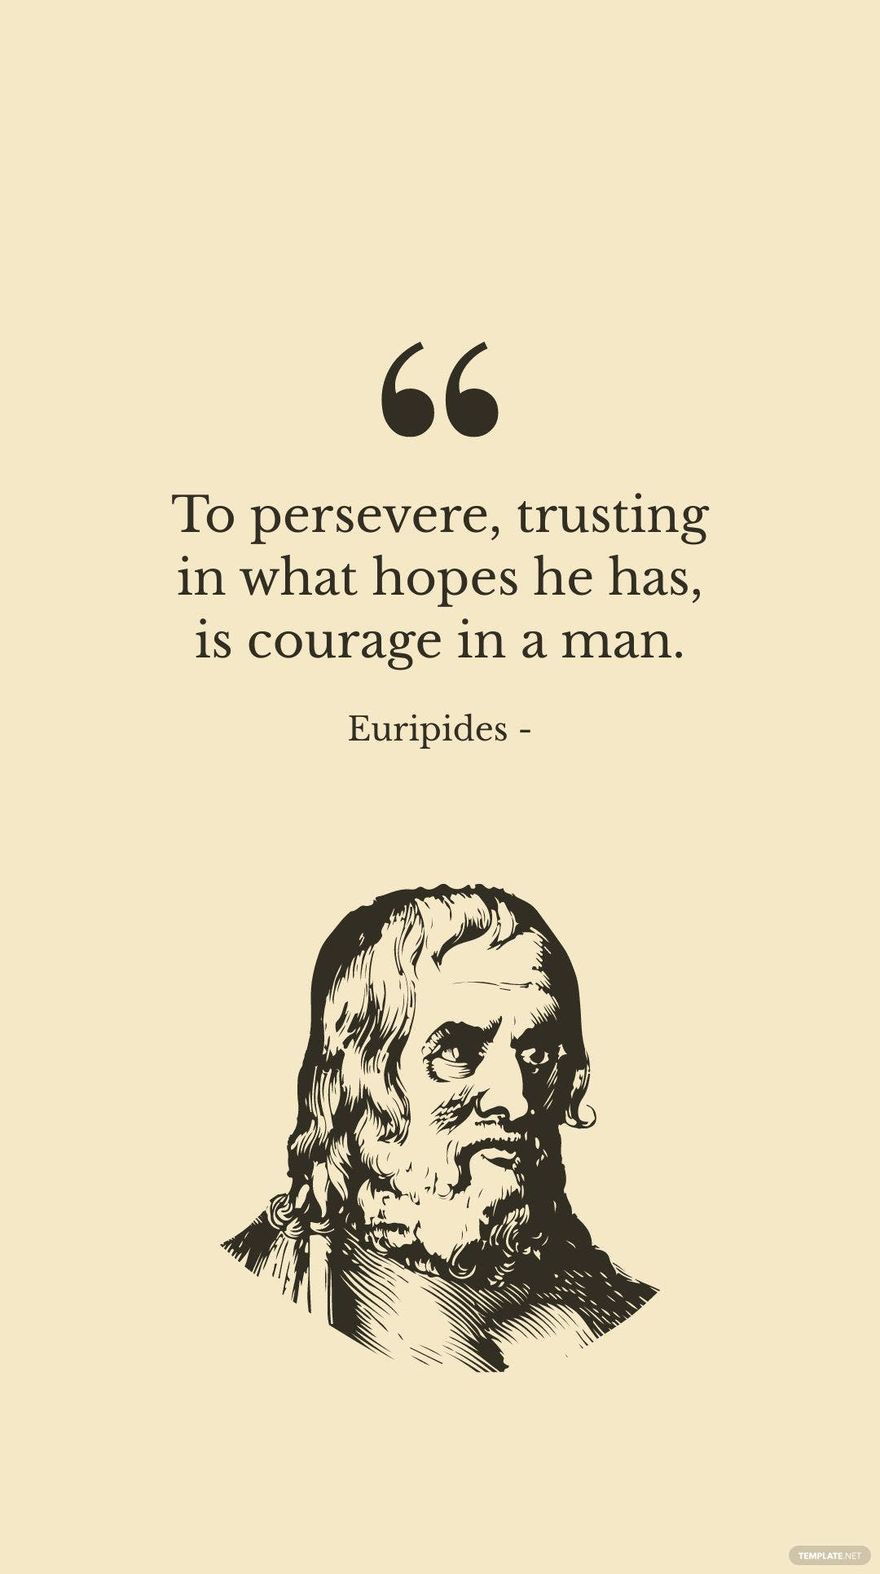 Euripides - To persevere, trusting in what hopes he has, is courage in a man.